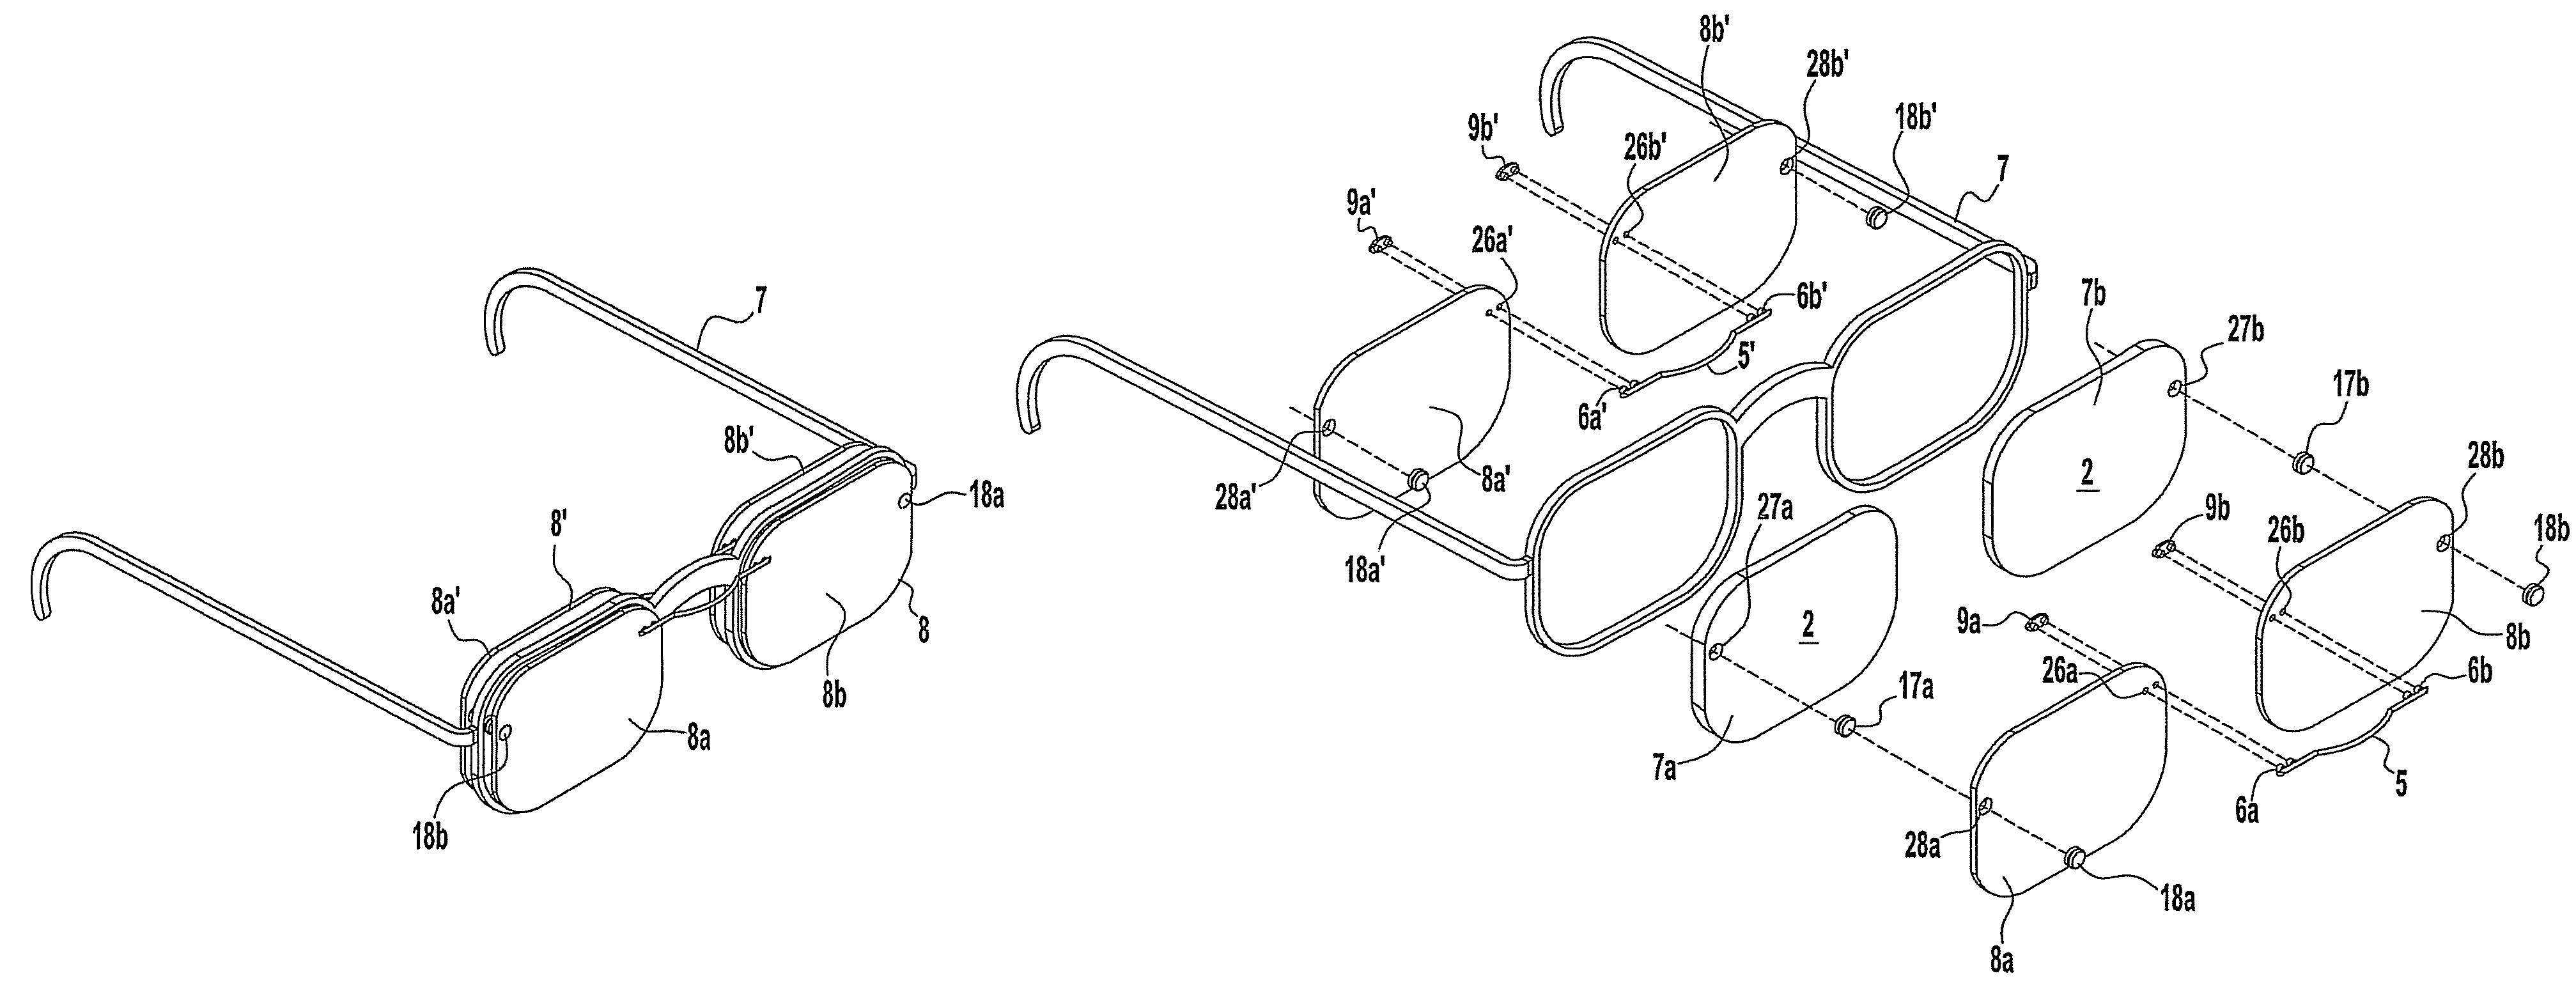 Attachable magnetic eyeglasses and method of making same